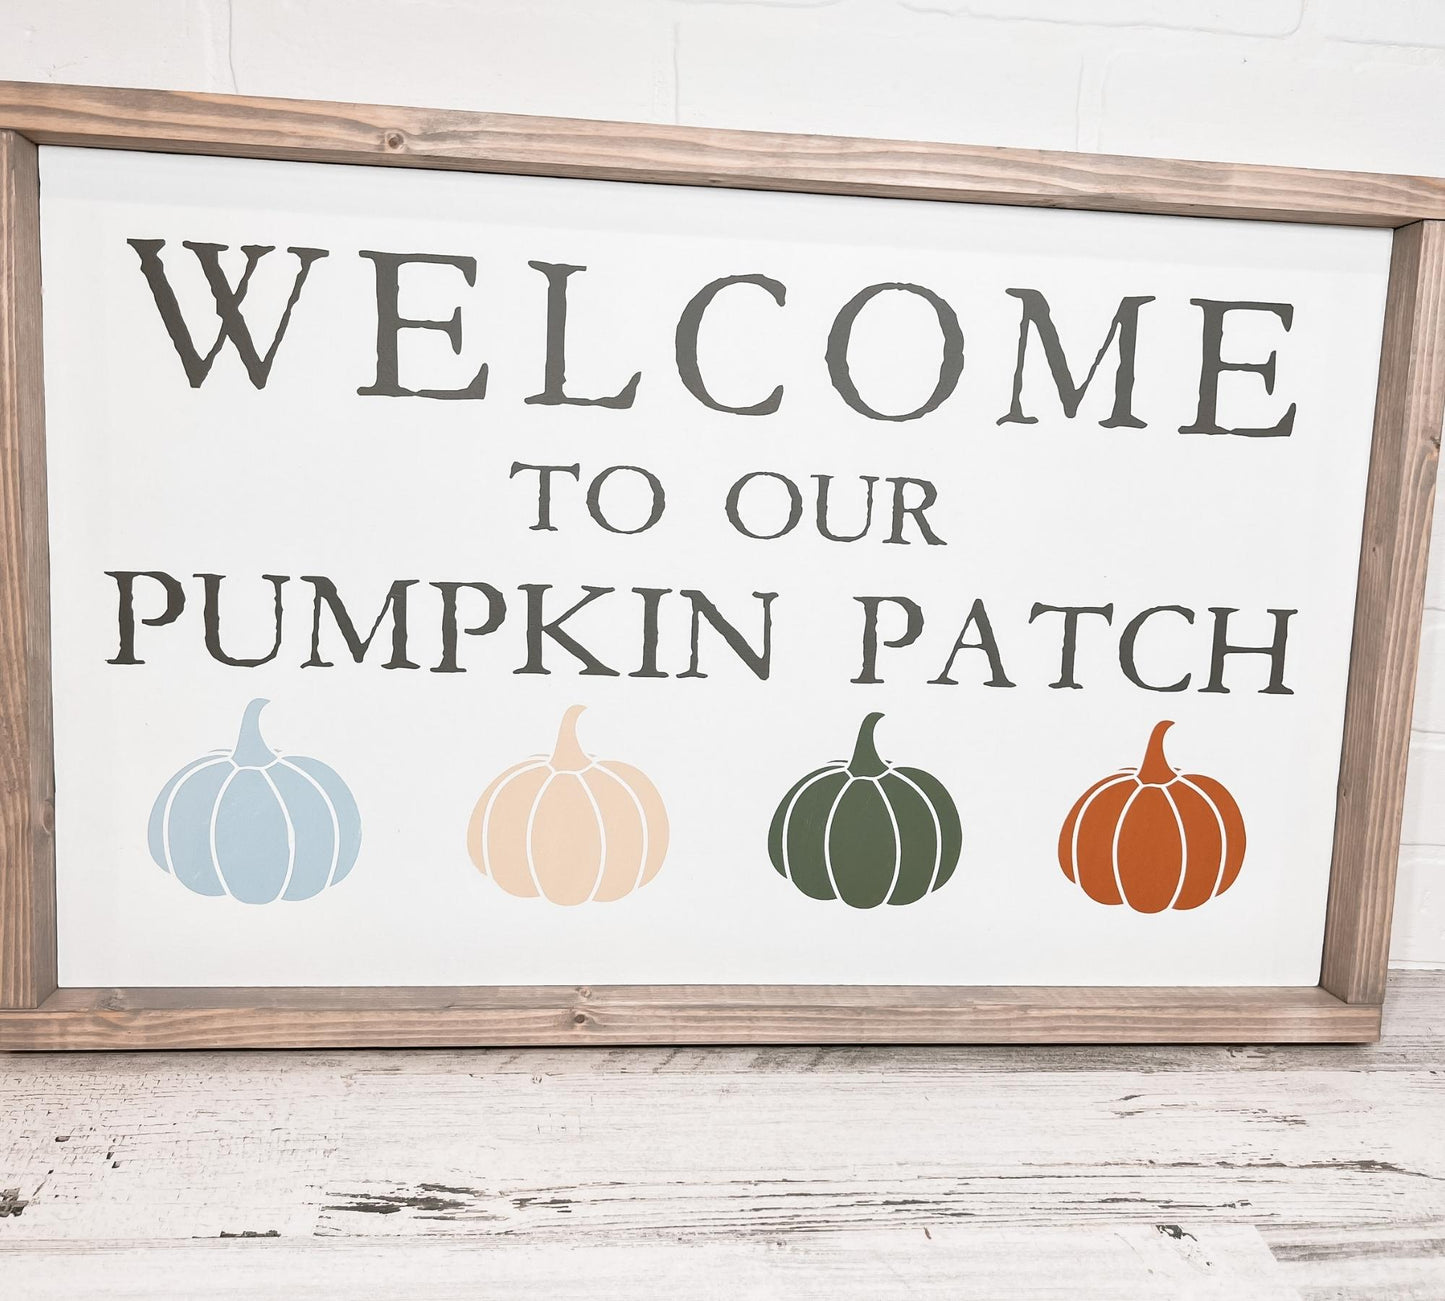 WELCOME TO OUR PUMPKIN PATCH - B-Cozy Home Decor